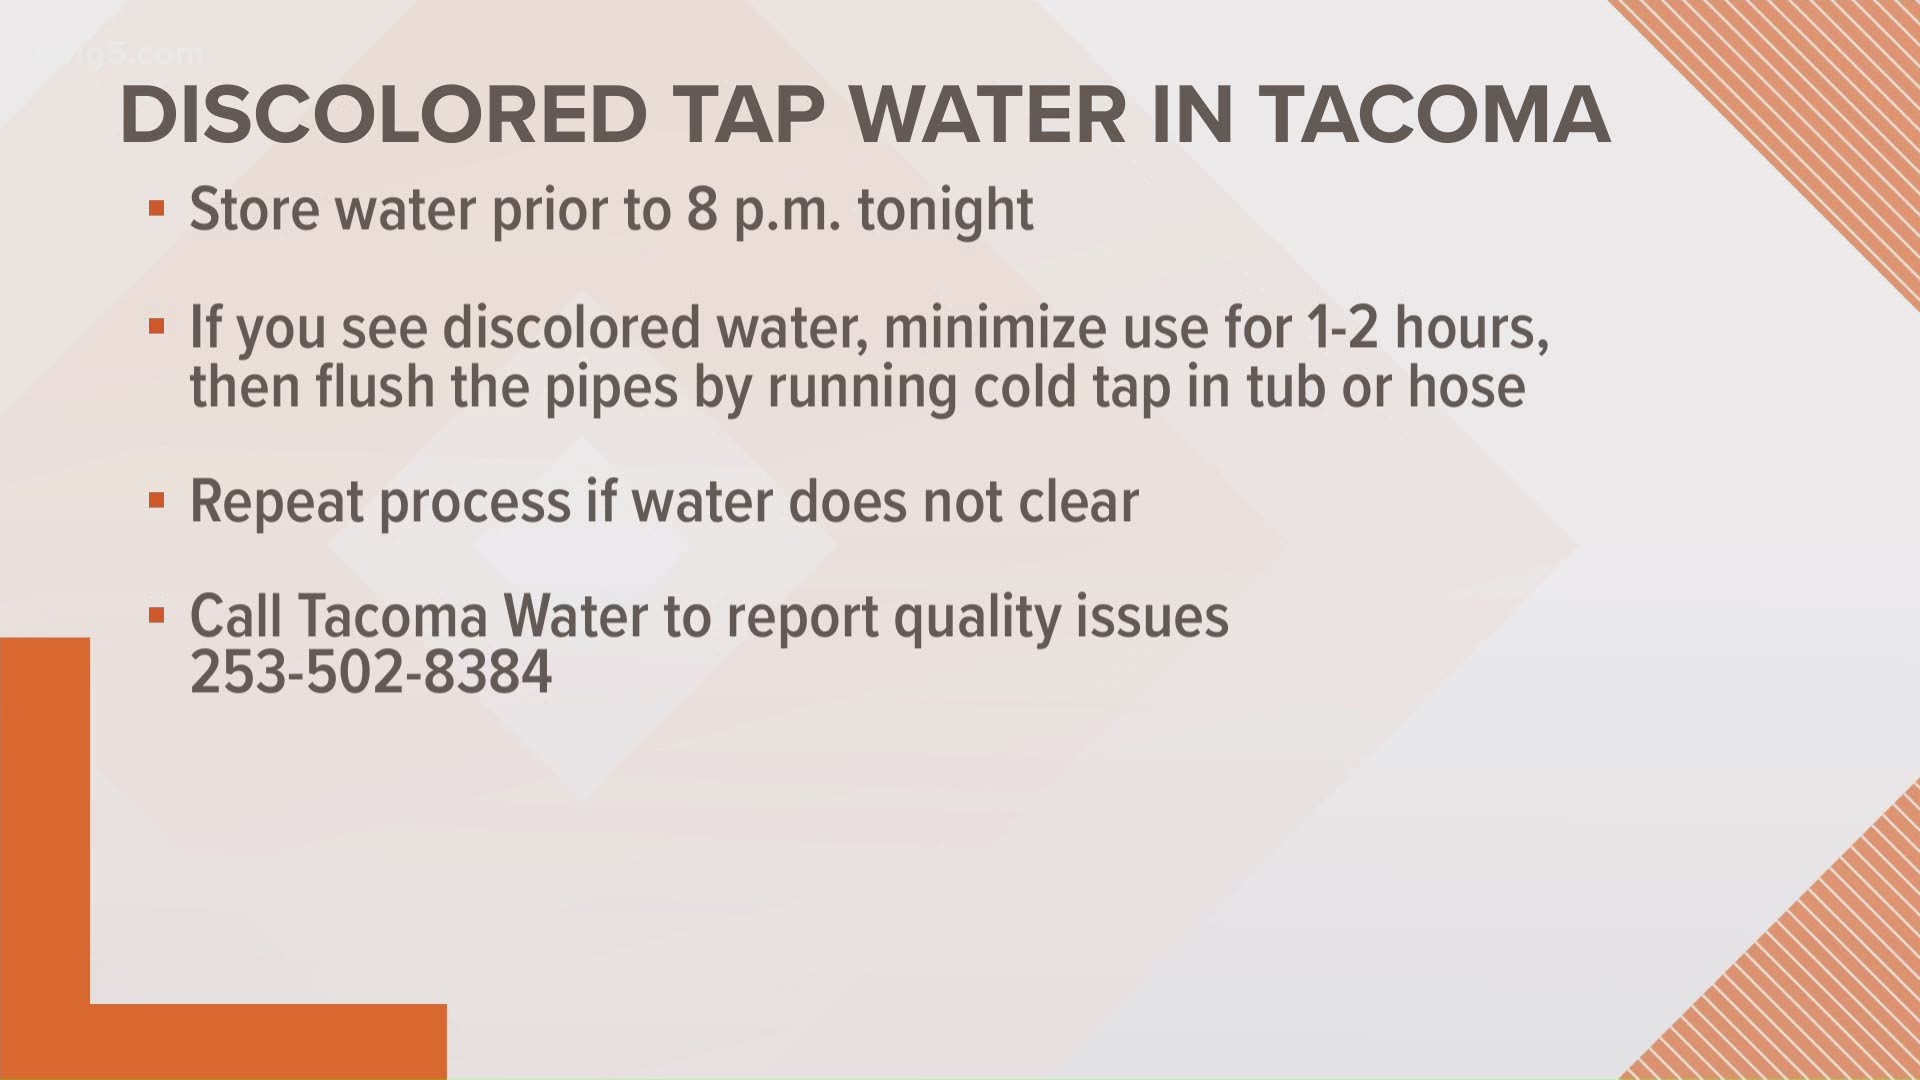 Tacoma Public Utilities will be working on water pipes Thursday night in some areas of the city, which could cause discolored or cloudy water for impacted residents.